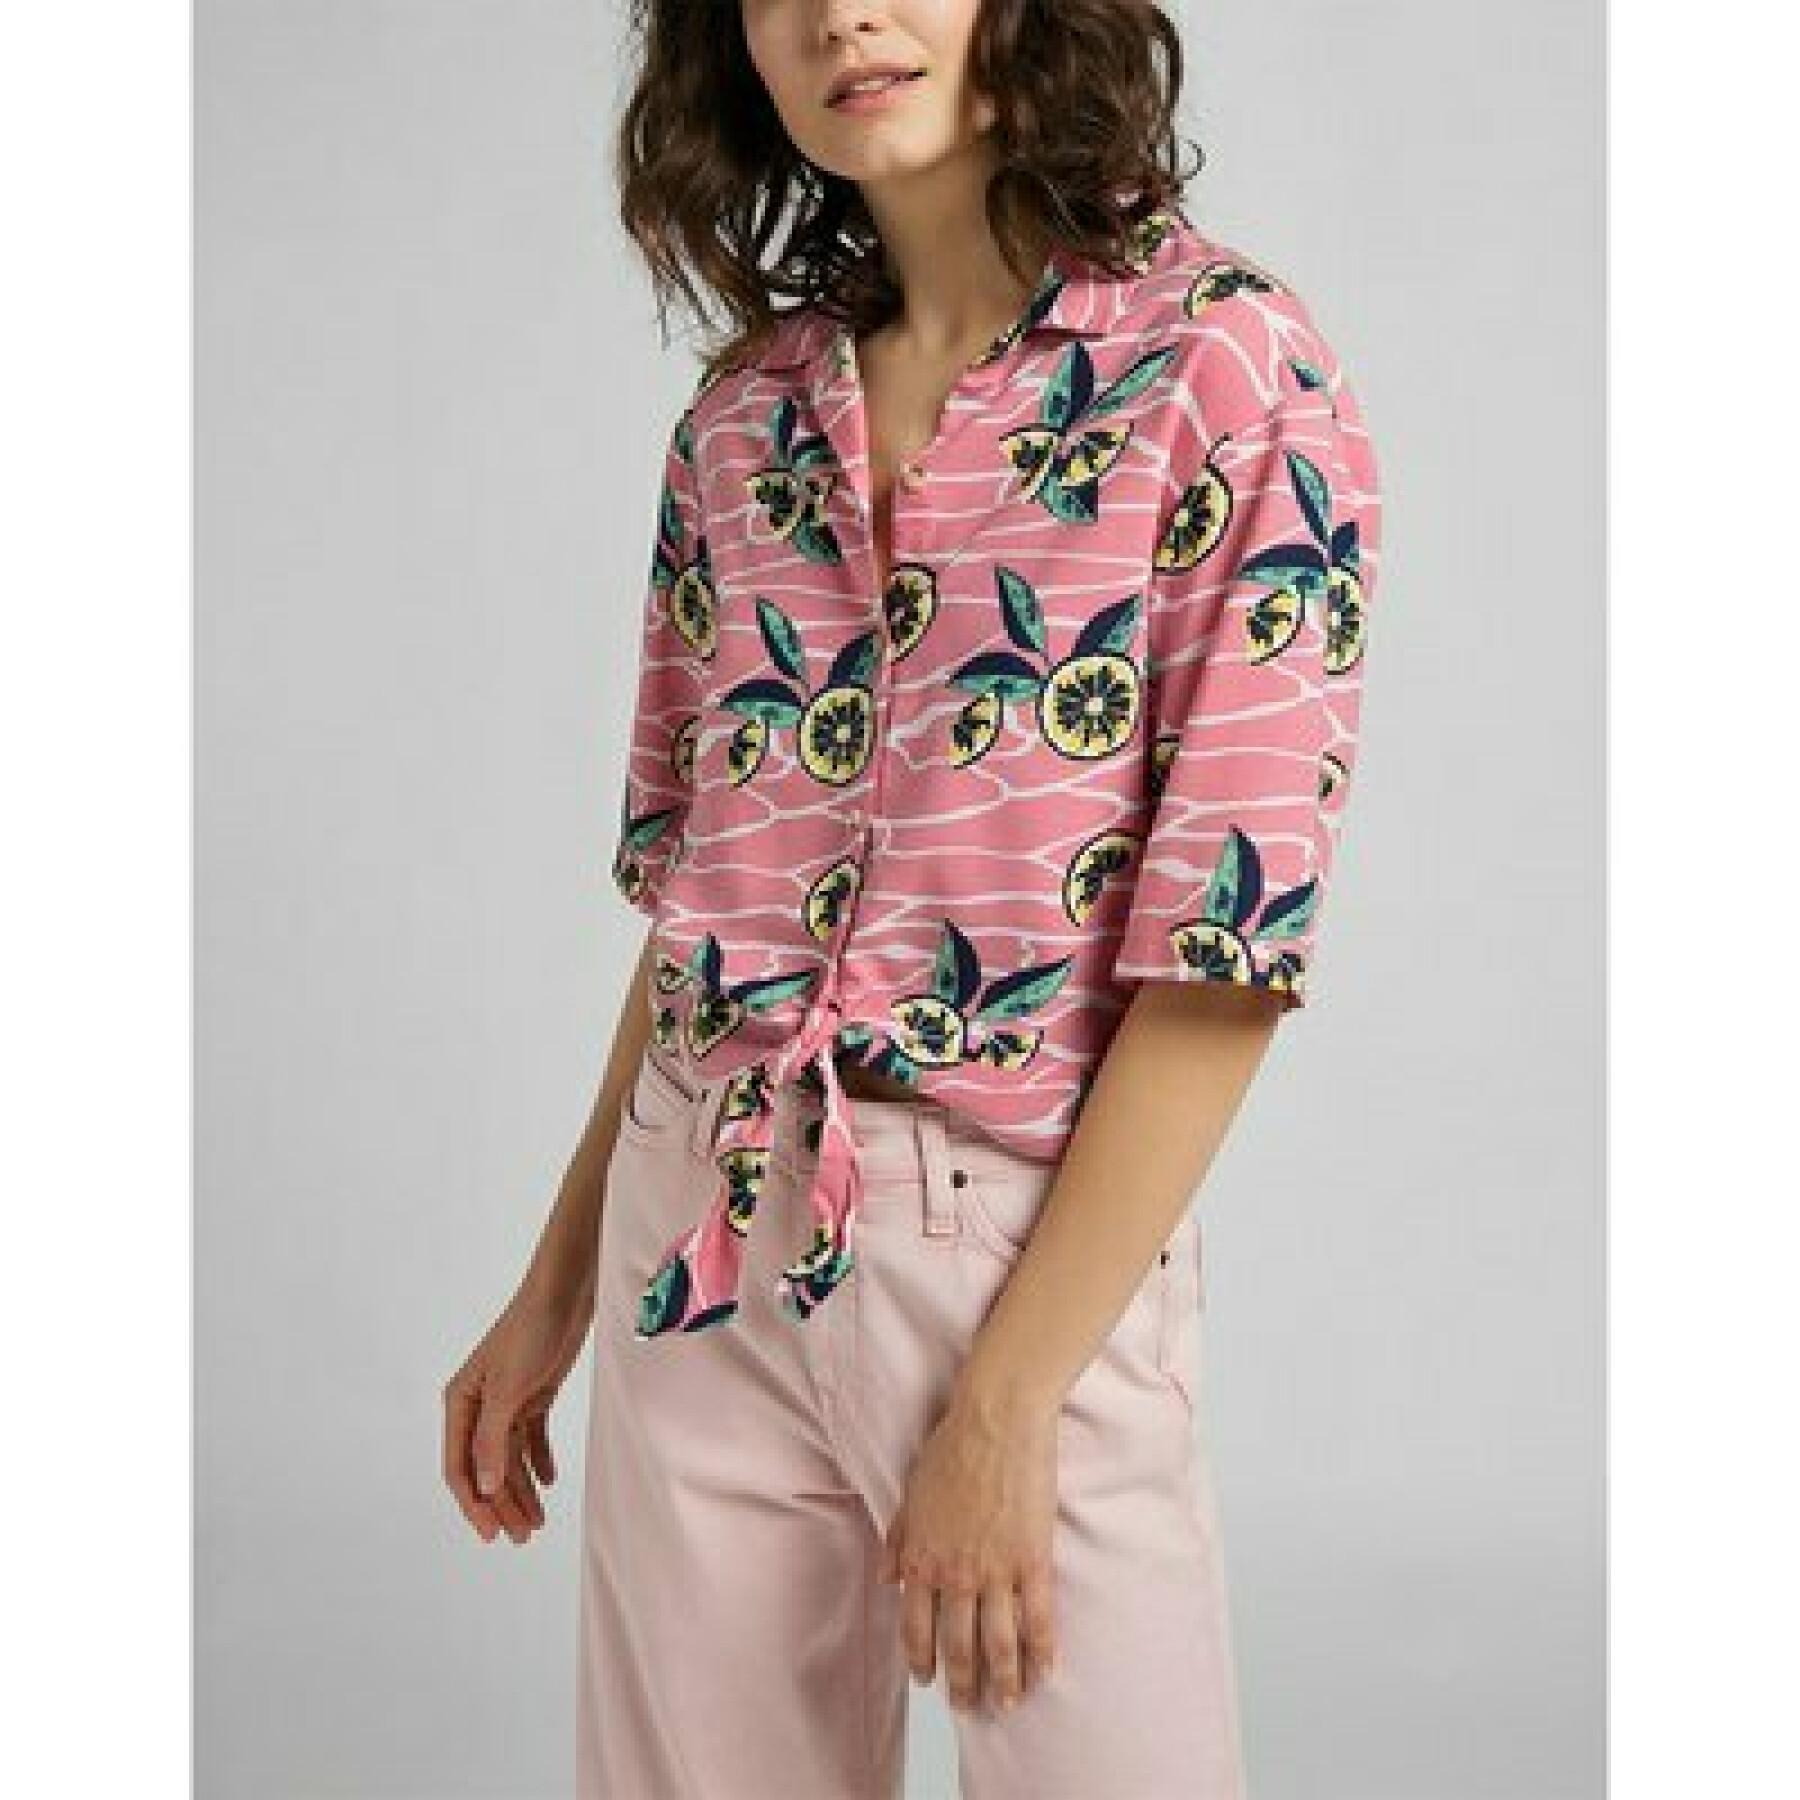 Woman's shirt Lee Knotted Resort